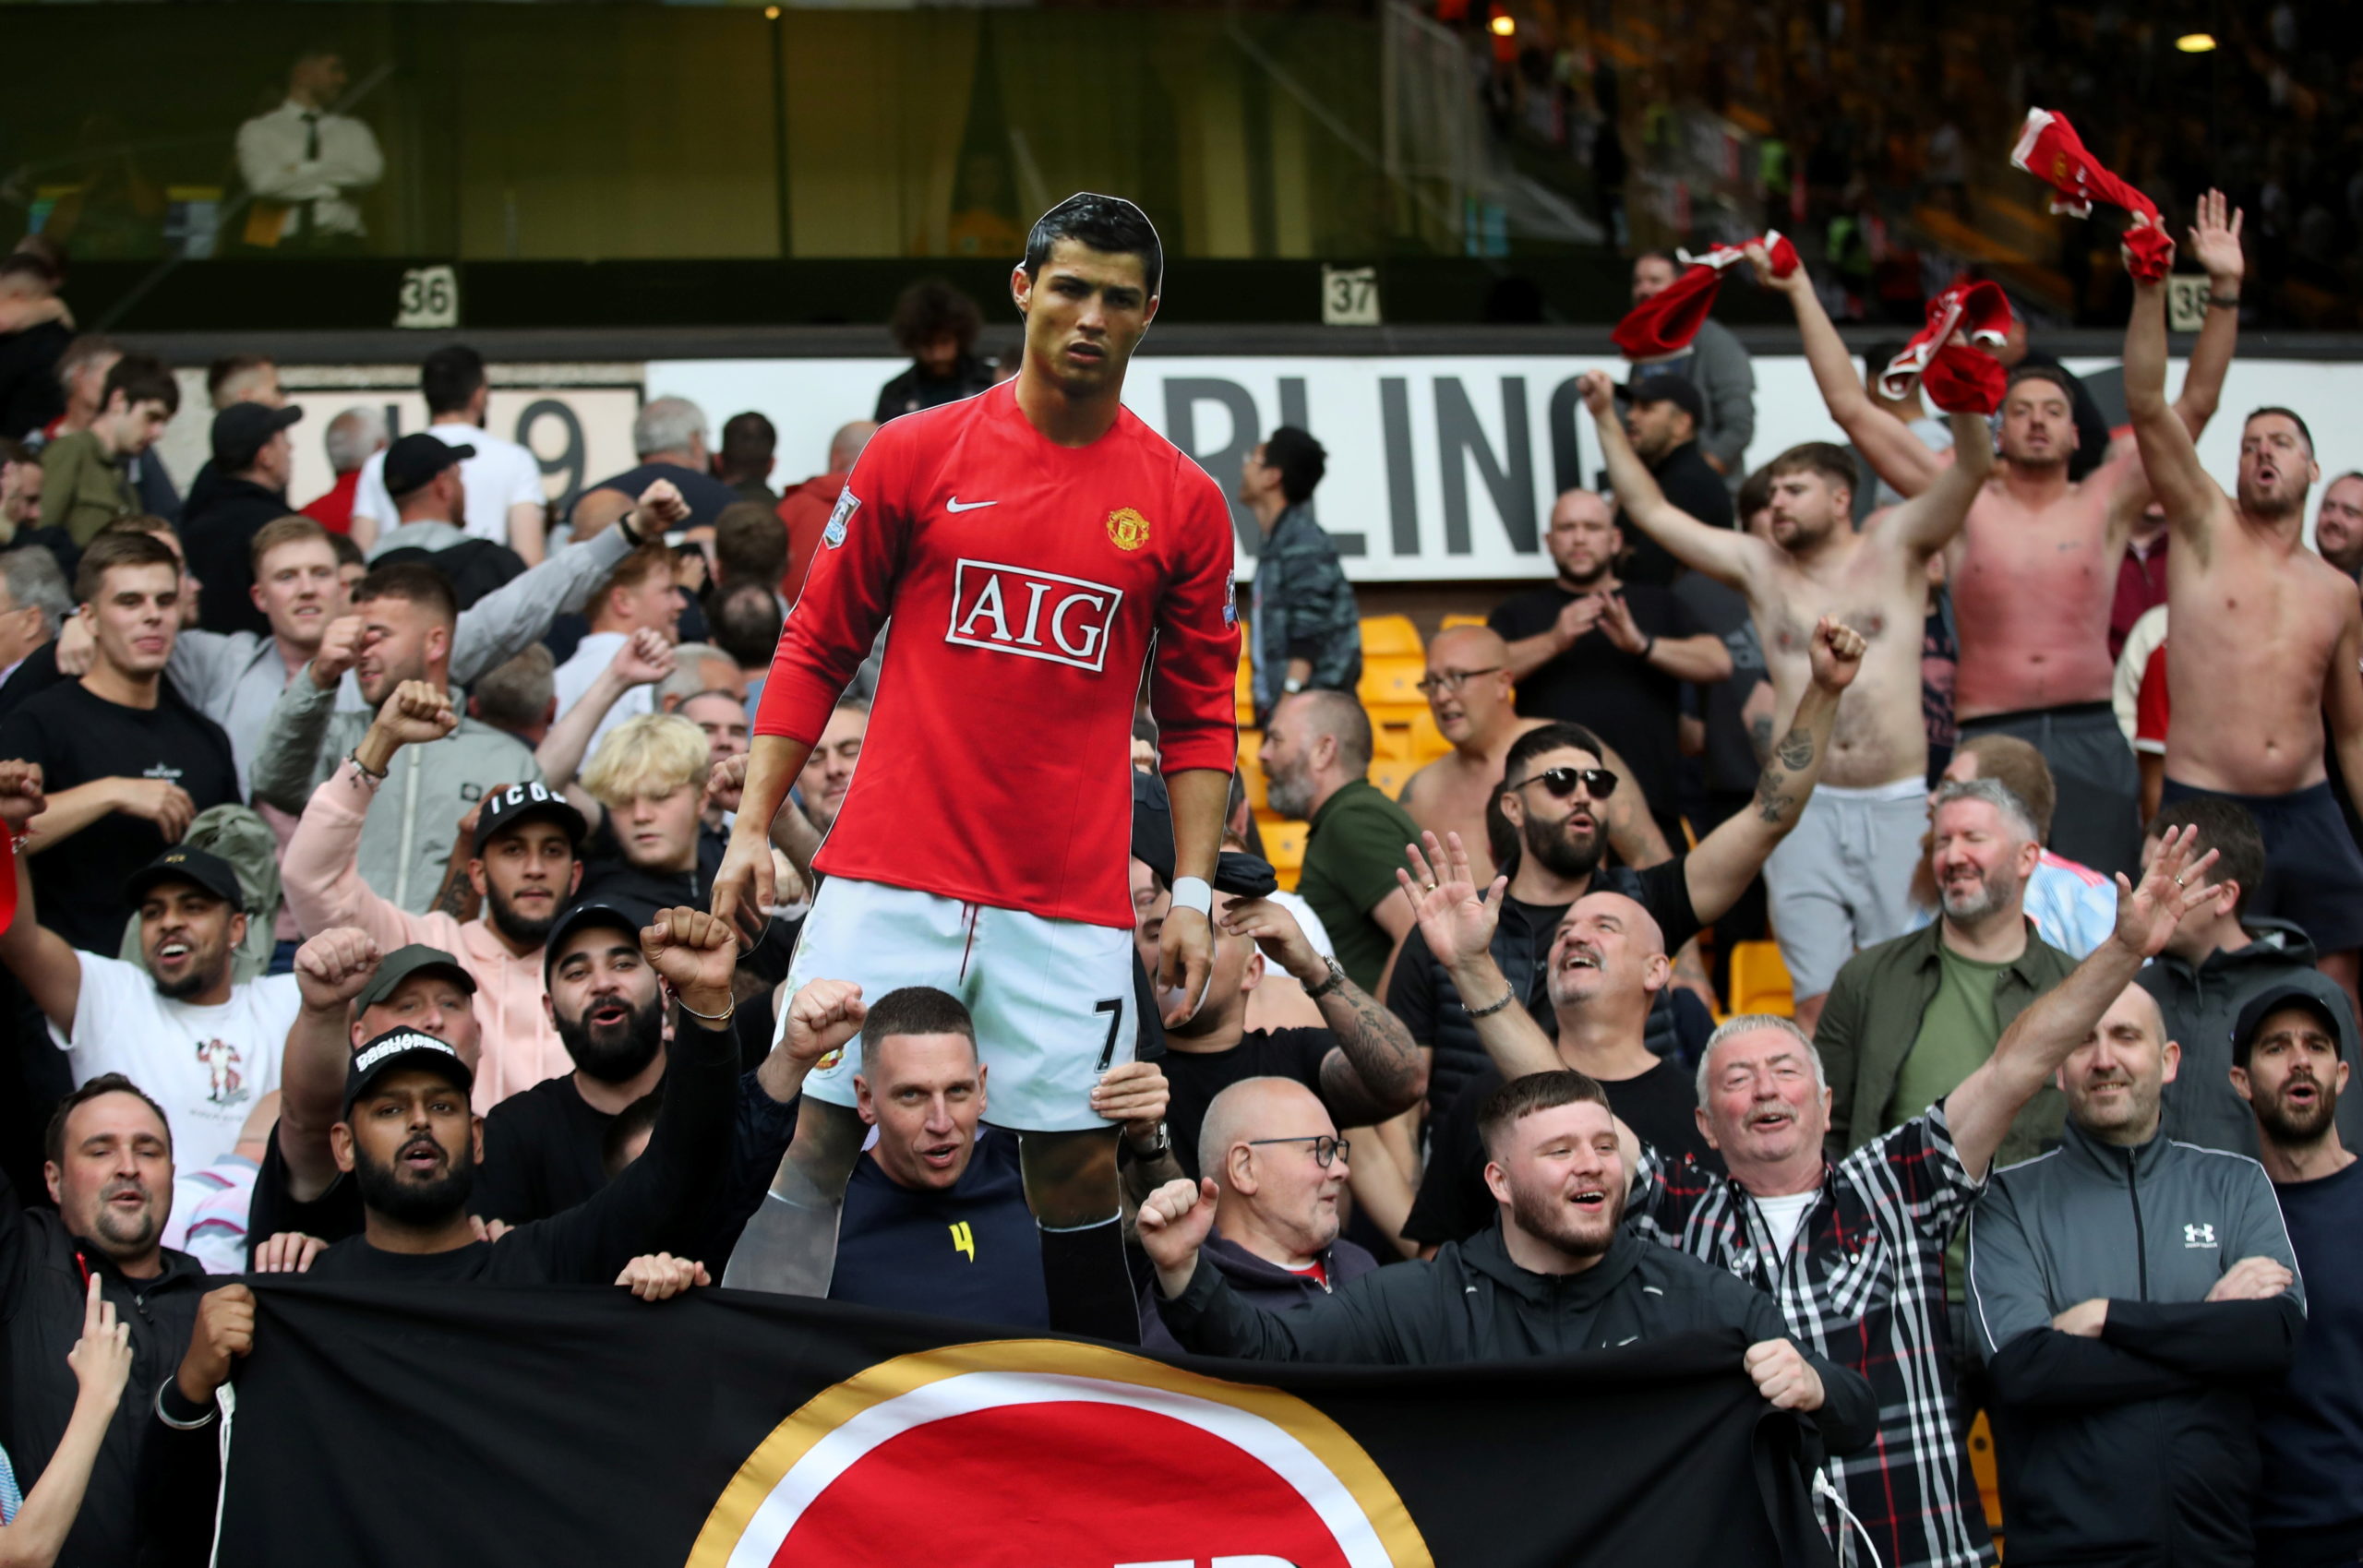 Manchester United fans celebrate with a cardboard cut out of Cristiano Ronaldo after the match